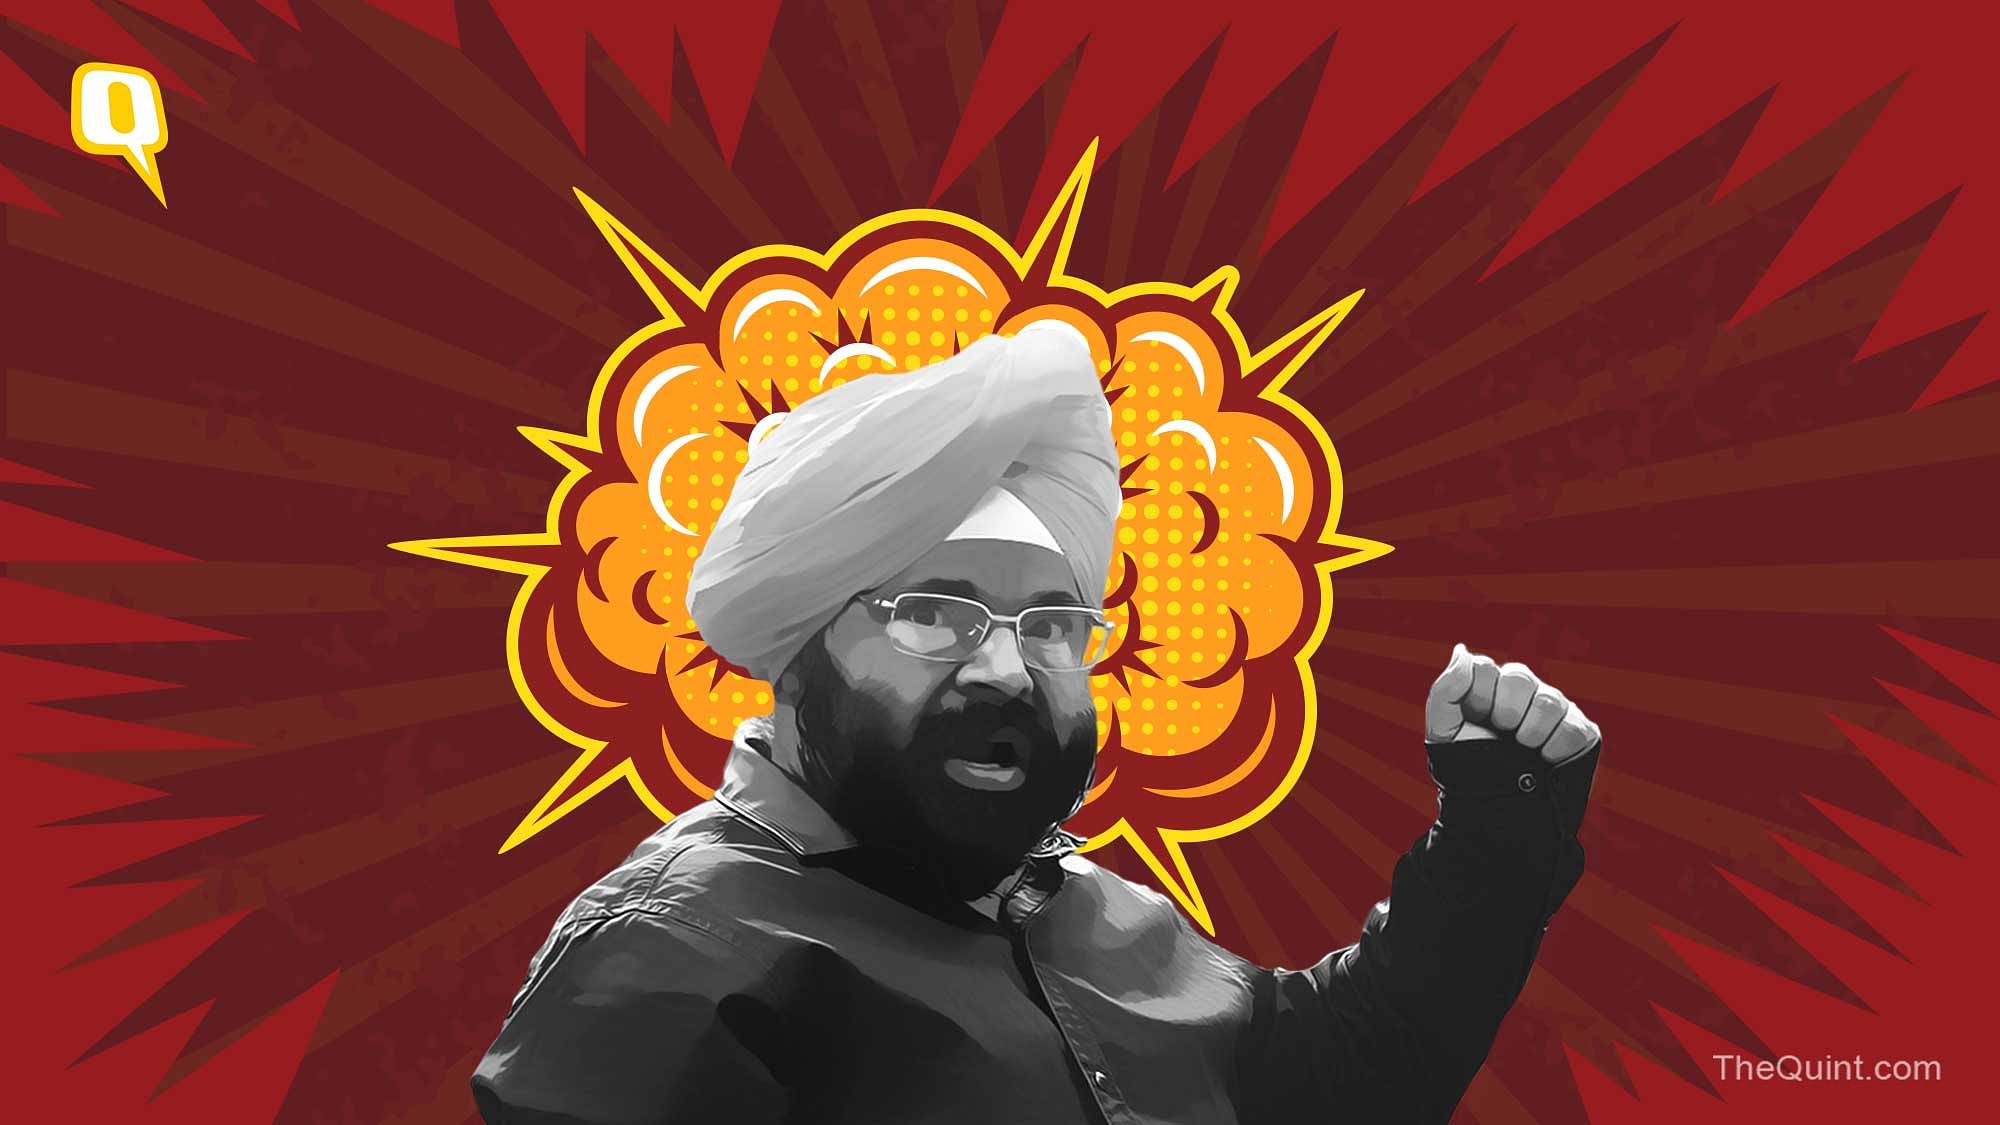 Paramjit Singh Pamma is popularly known as India’s angriest man.